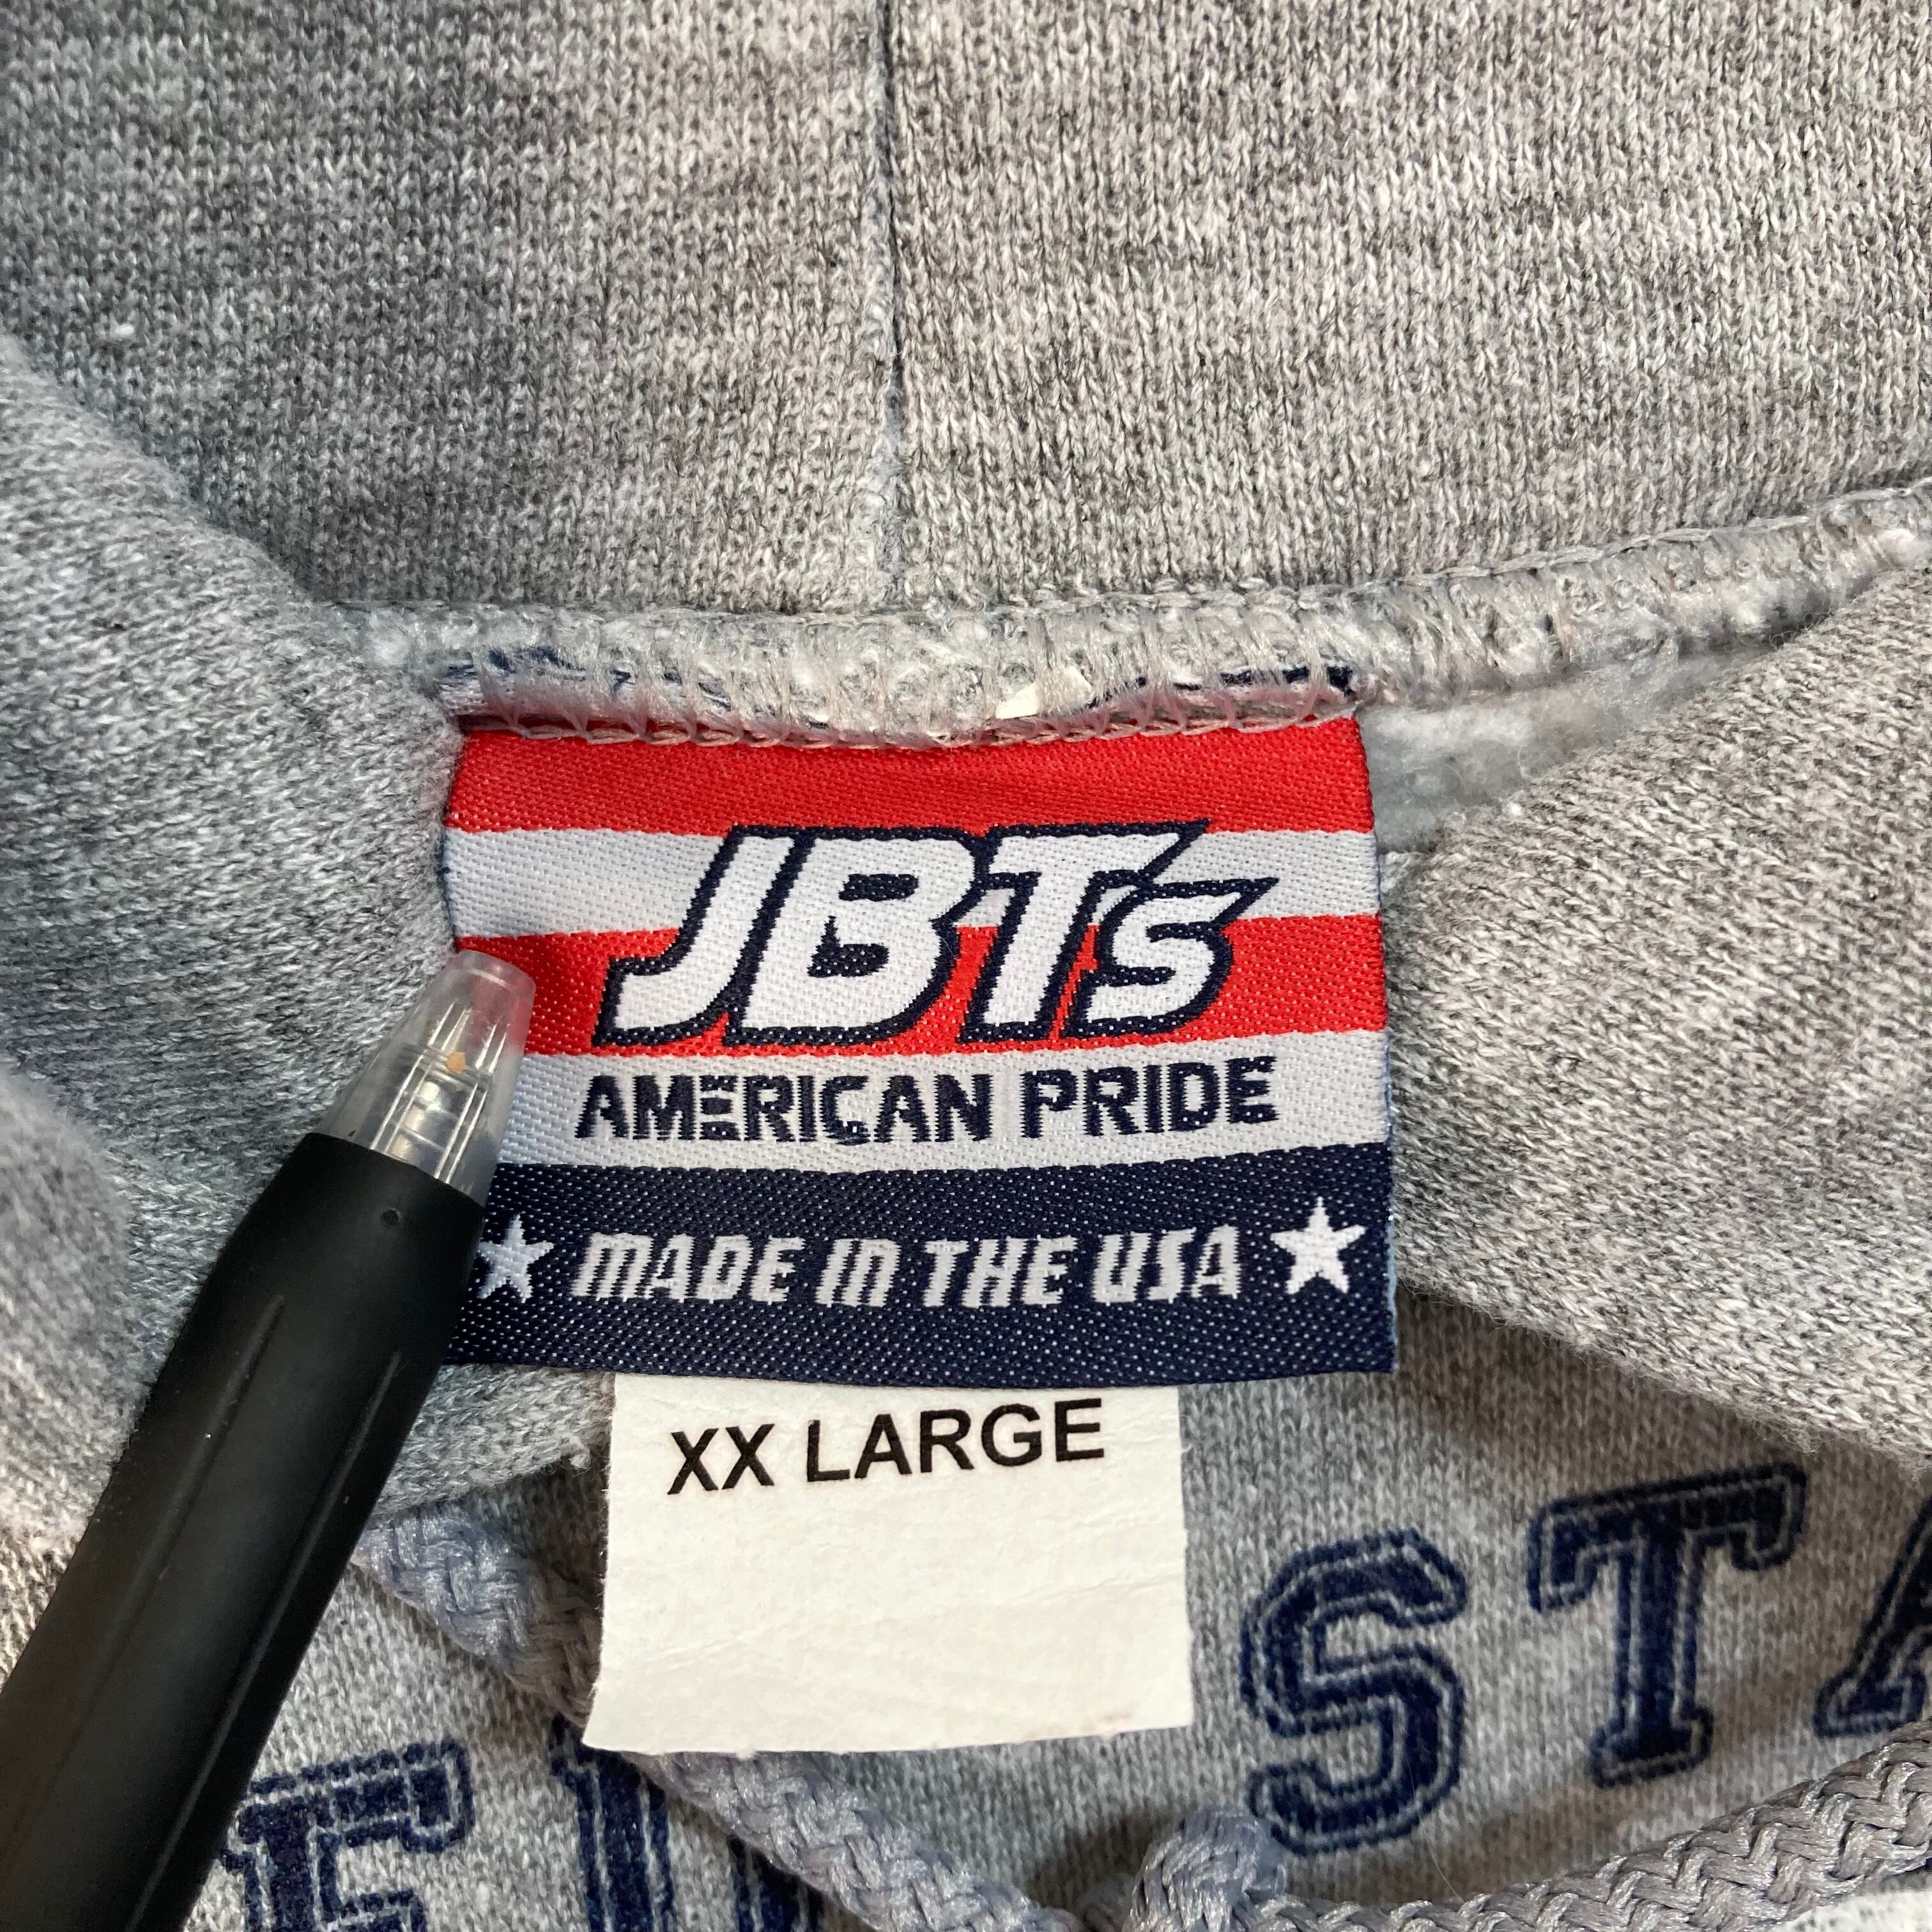 【JBTs AMERICAN PRIDE】Pullover Hoodie XXL Made in USA 90s “US NAVY”  プルオーバーパーカー アメリカ海軍 米軍 軍モノ フーディ センターロゴ アメリカ USA 古着